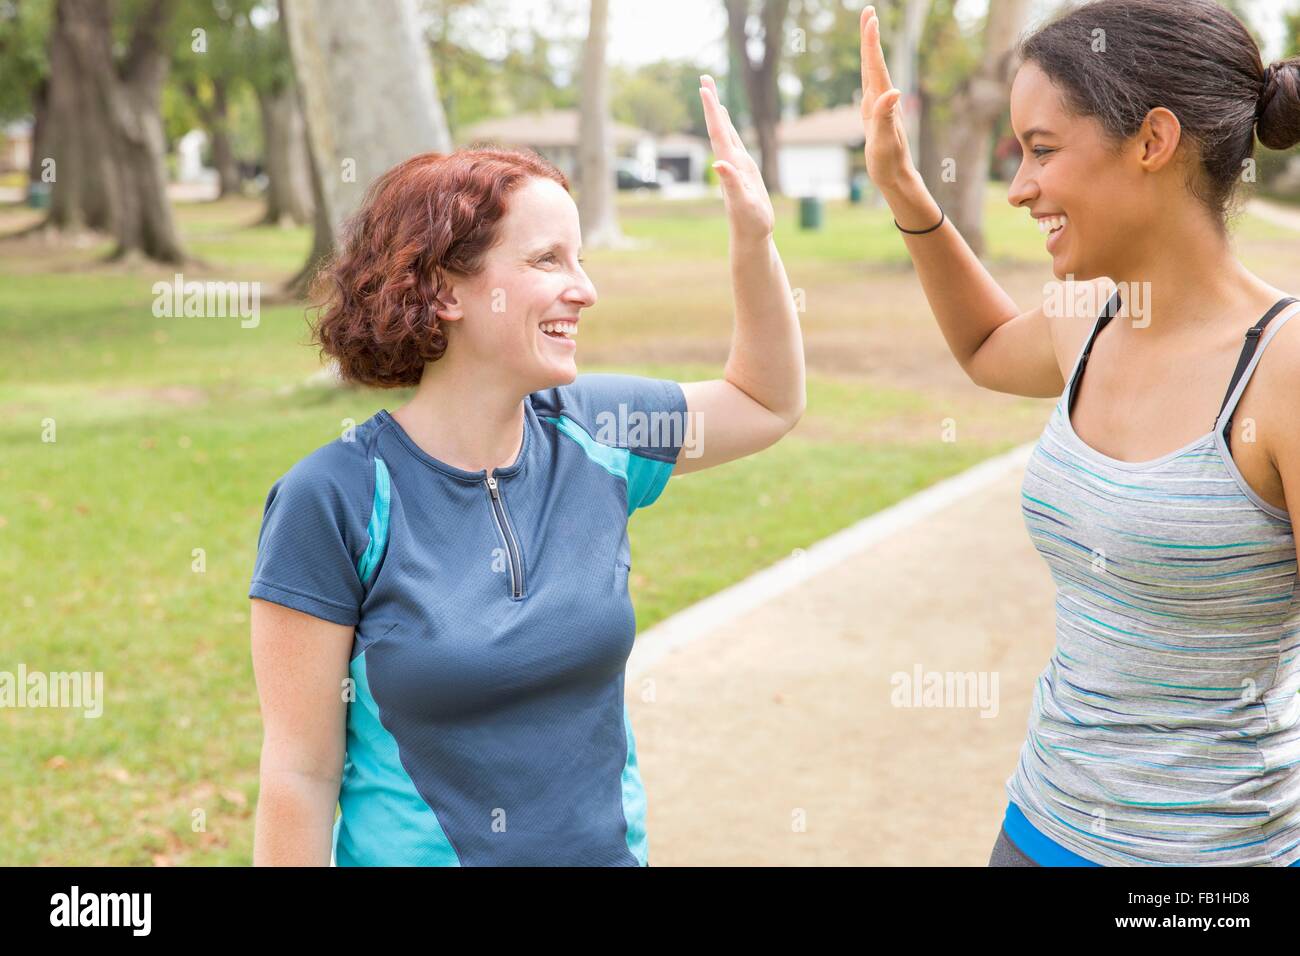 Young women wearing sports clothing face to face smiling doing high five Stock Photo